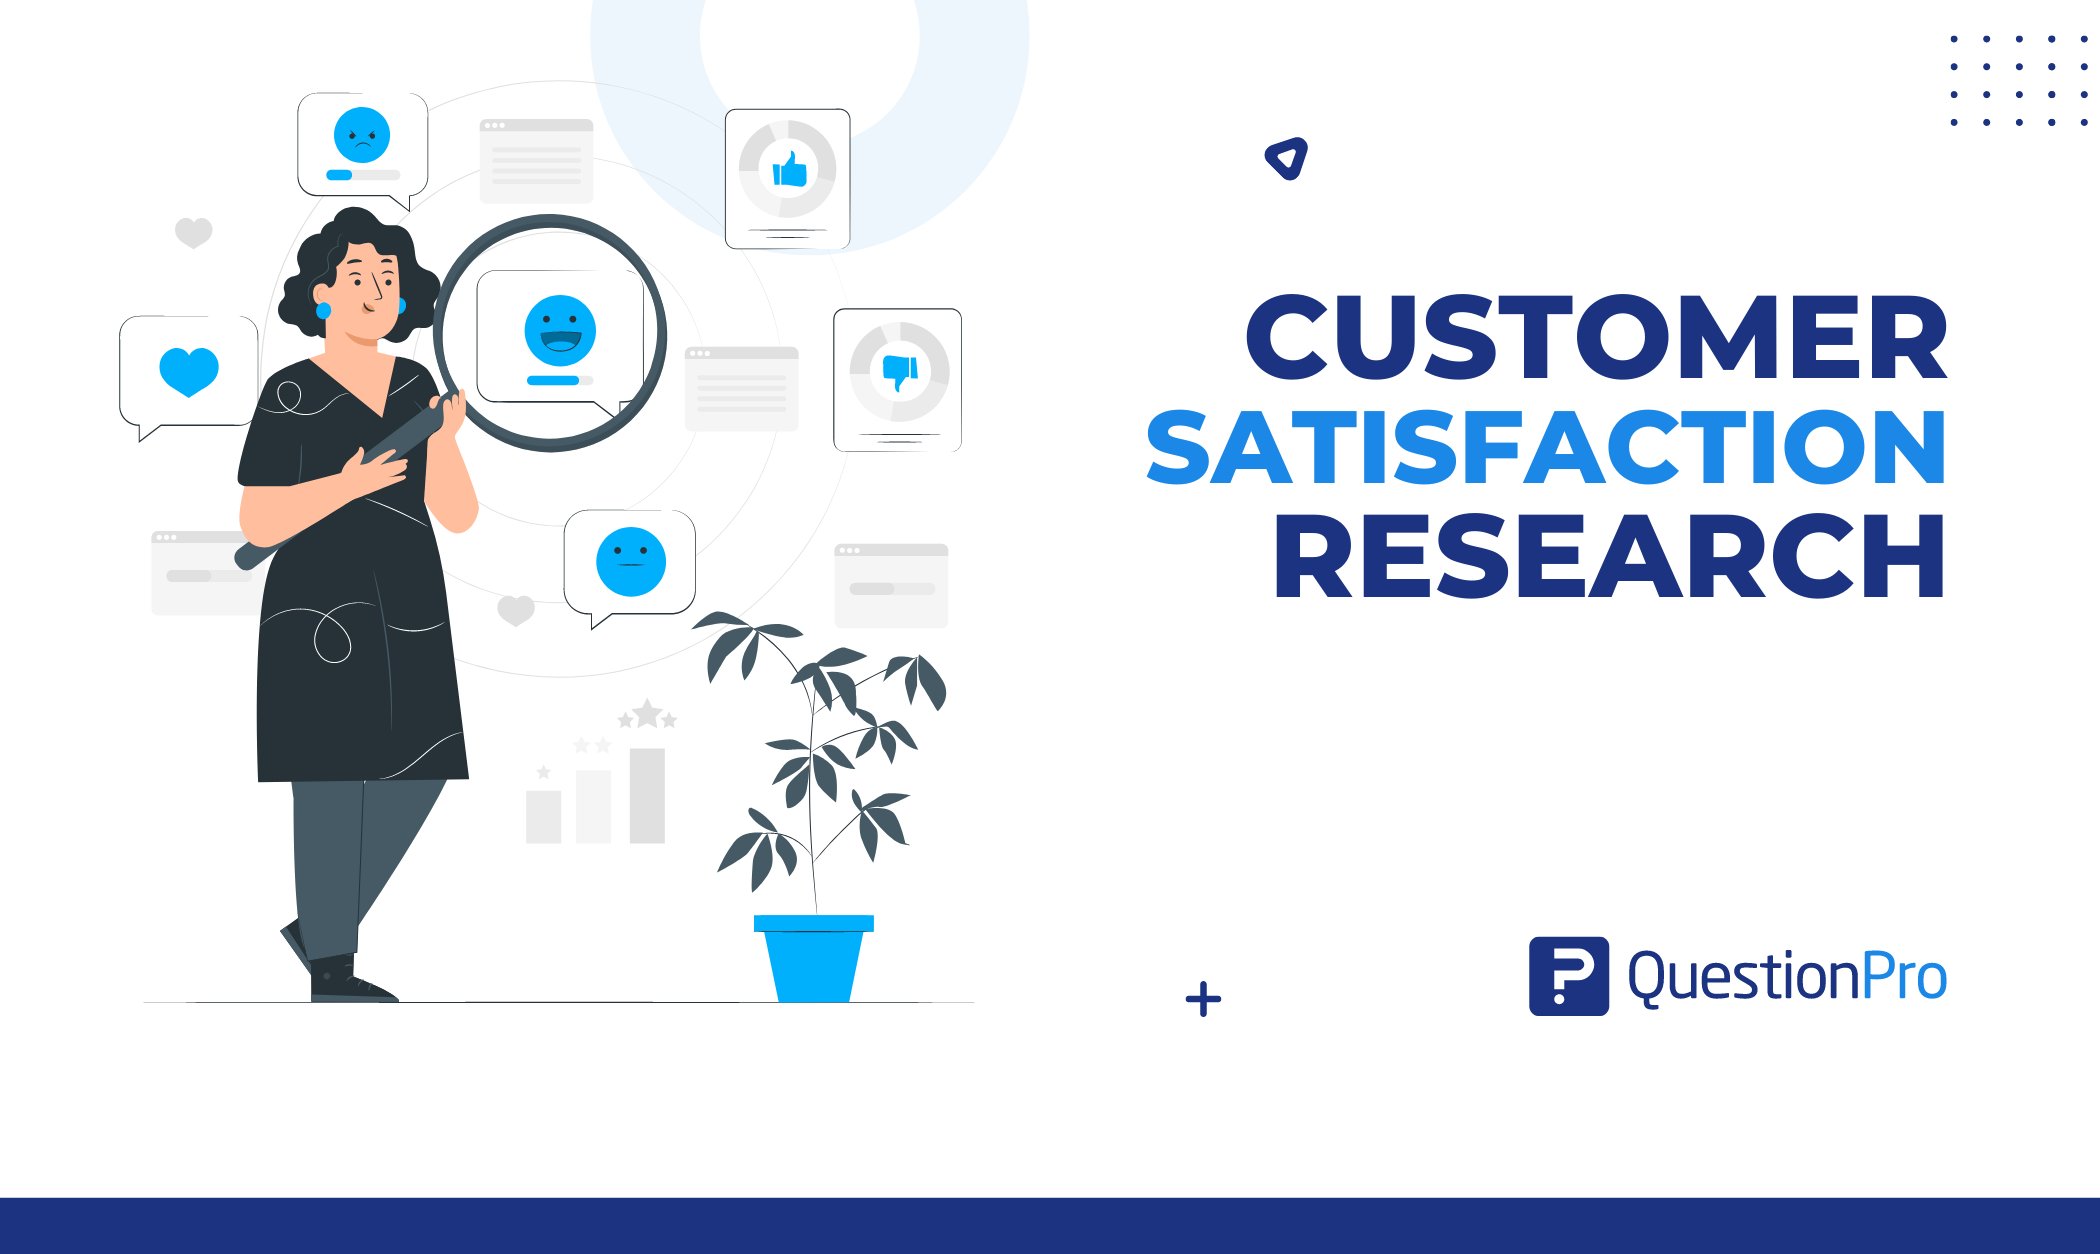 Discover customer satisfaction research and its impact on business success. Learn how to conduct effective research to understand your customers.